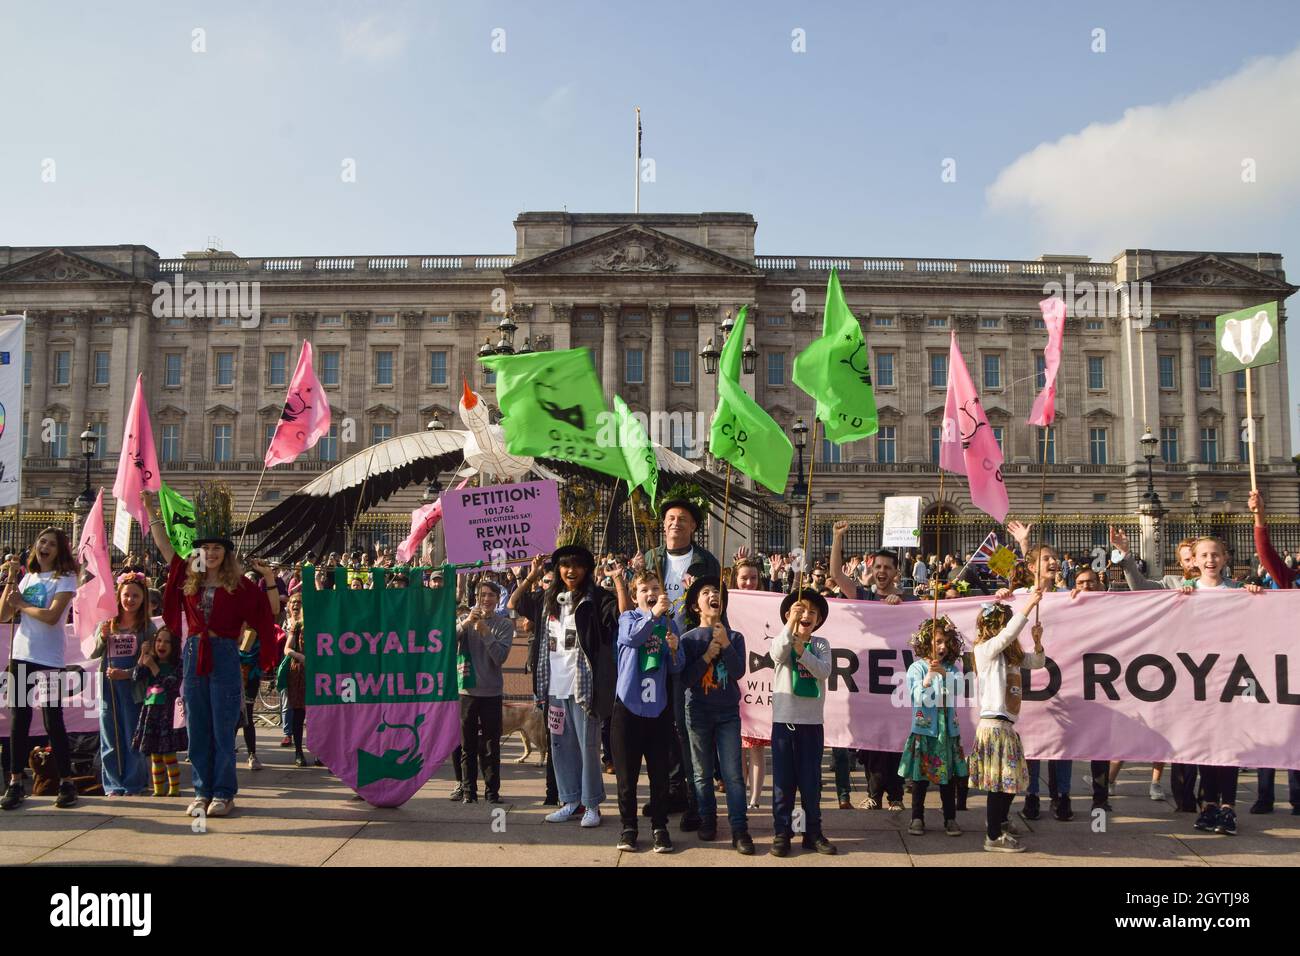 London, UK. 9th October 2021. Protesters, children, and families gathered outside Buckingham Palace and delivered a petition asking the royal family to rewild their land to increase wildlife and help fight the climate crisis. Stock Photo